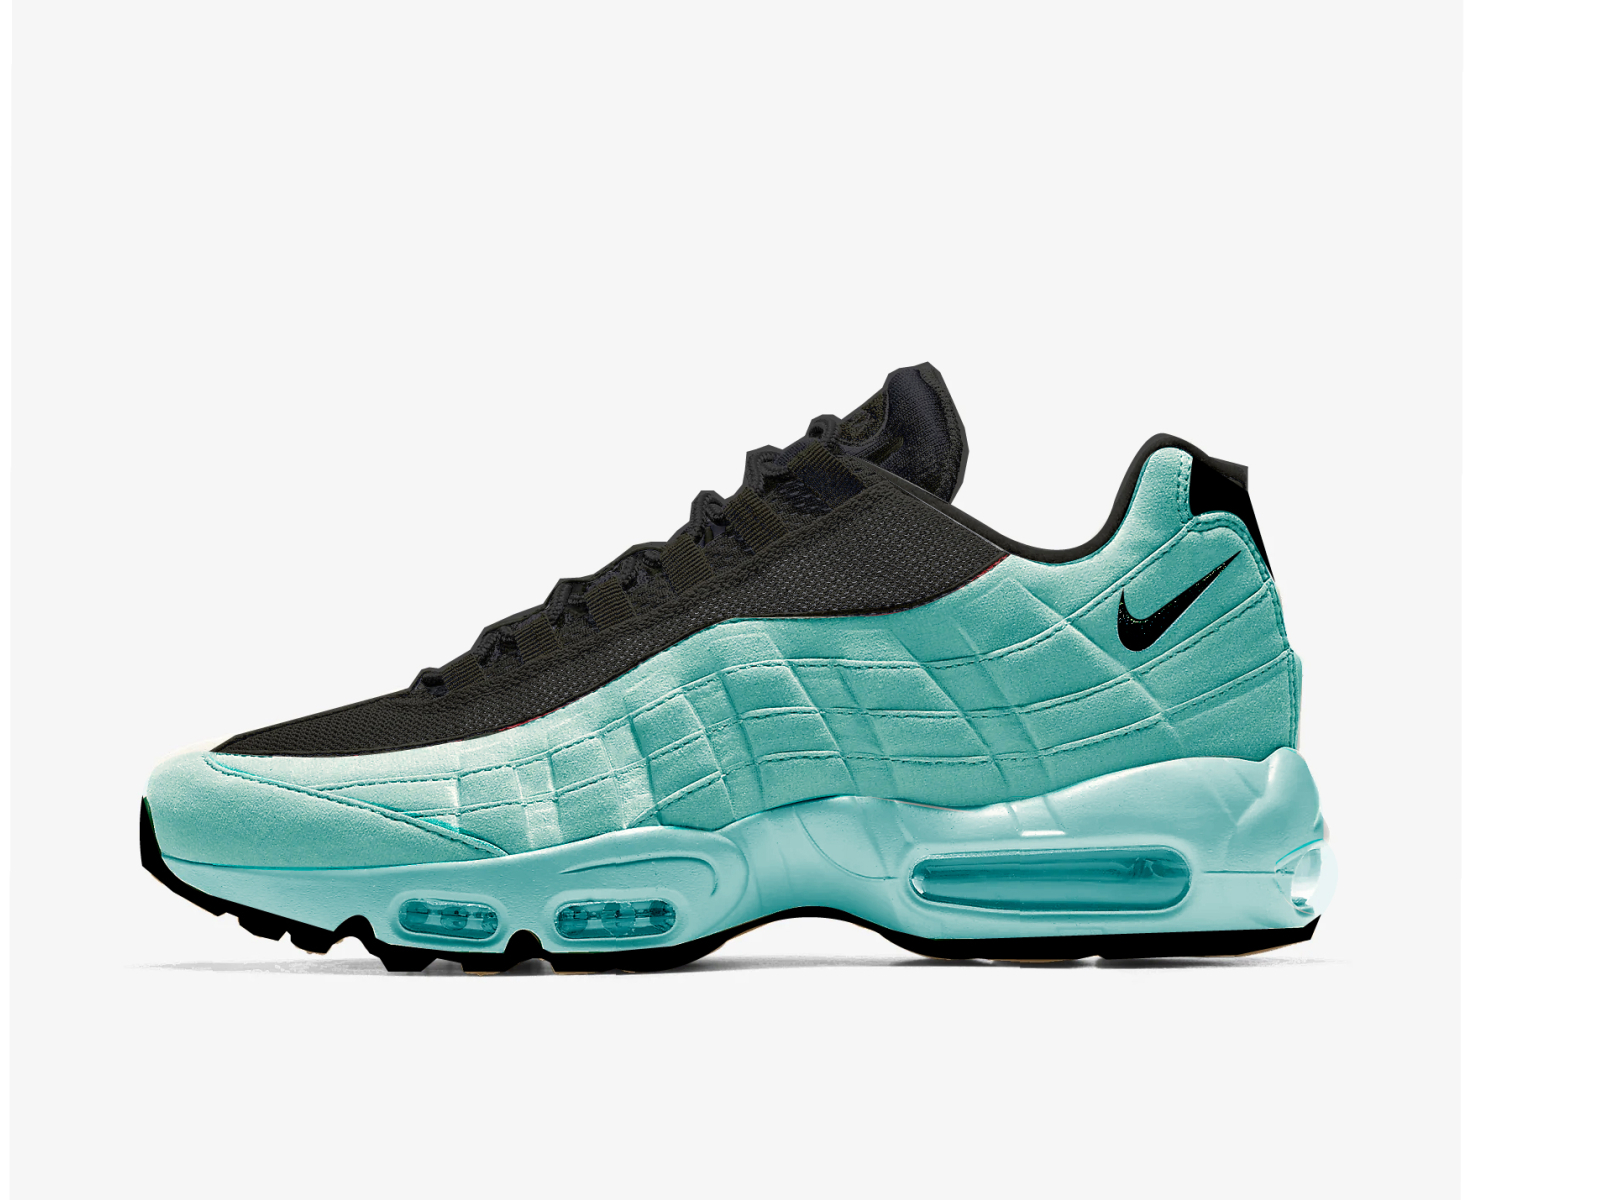 N95 BY SJE NIKE AIR MAX 95 CONCEPT 2020 